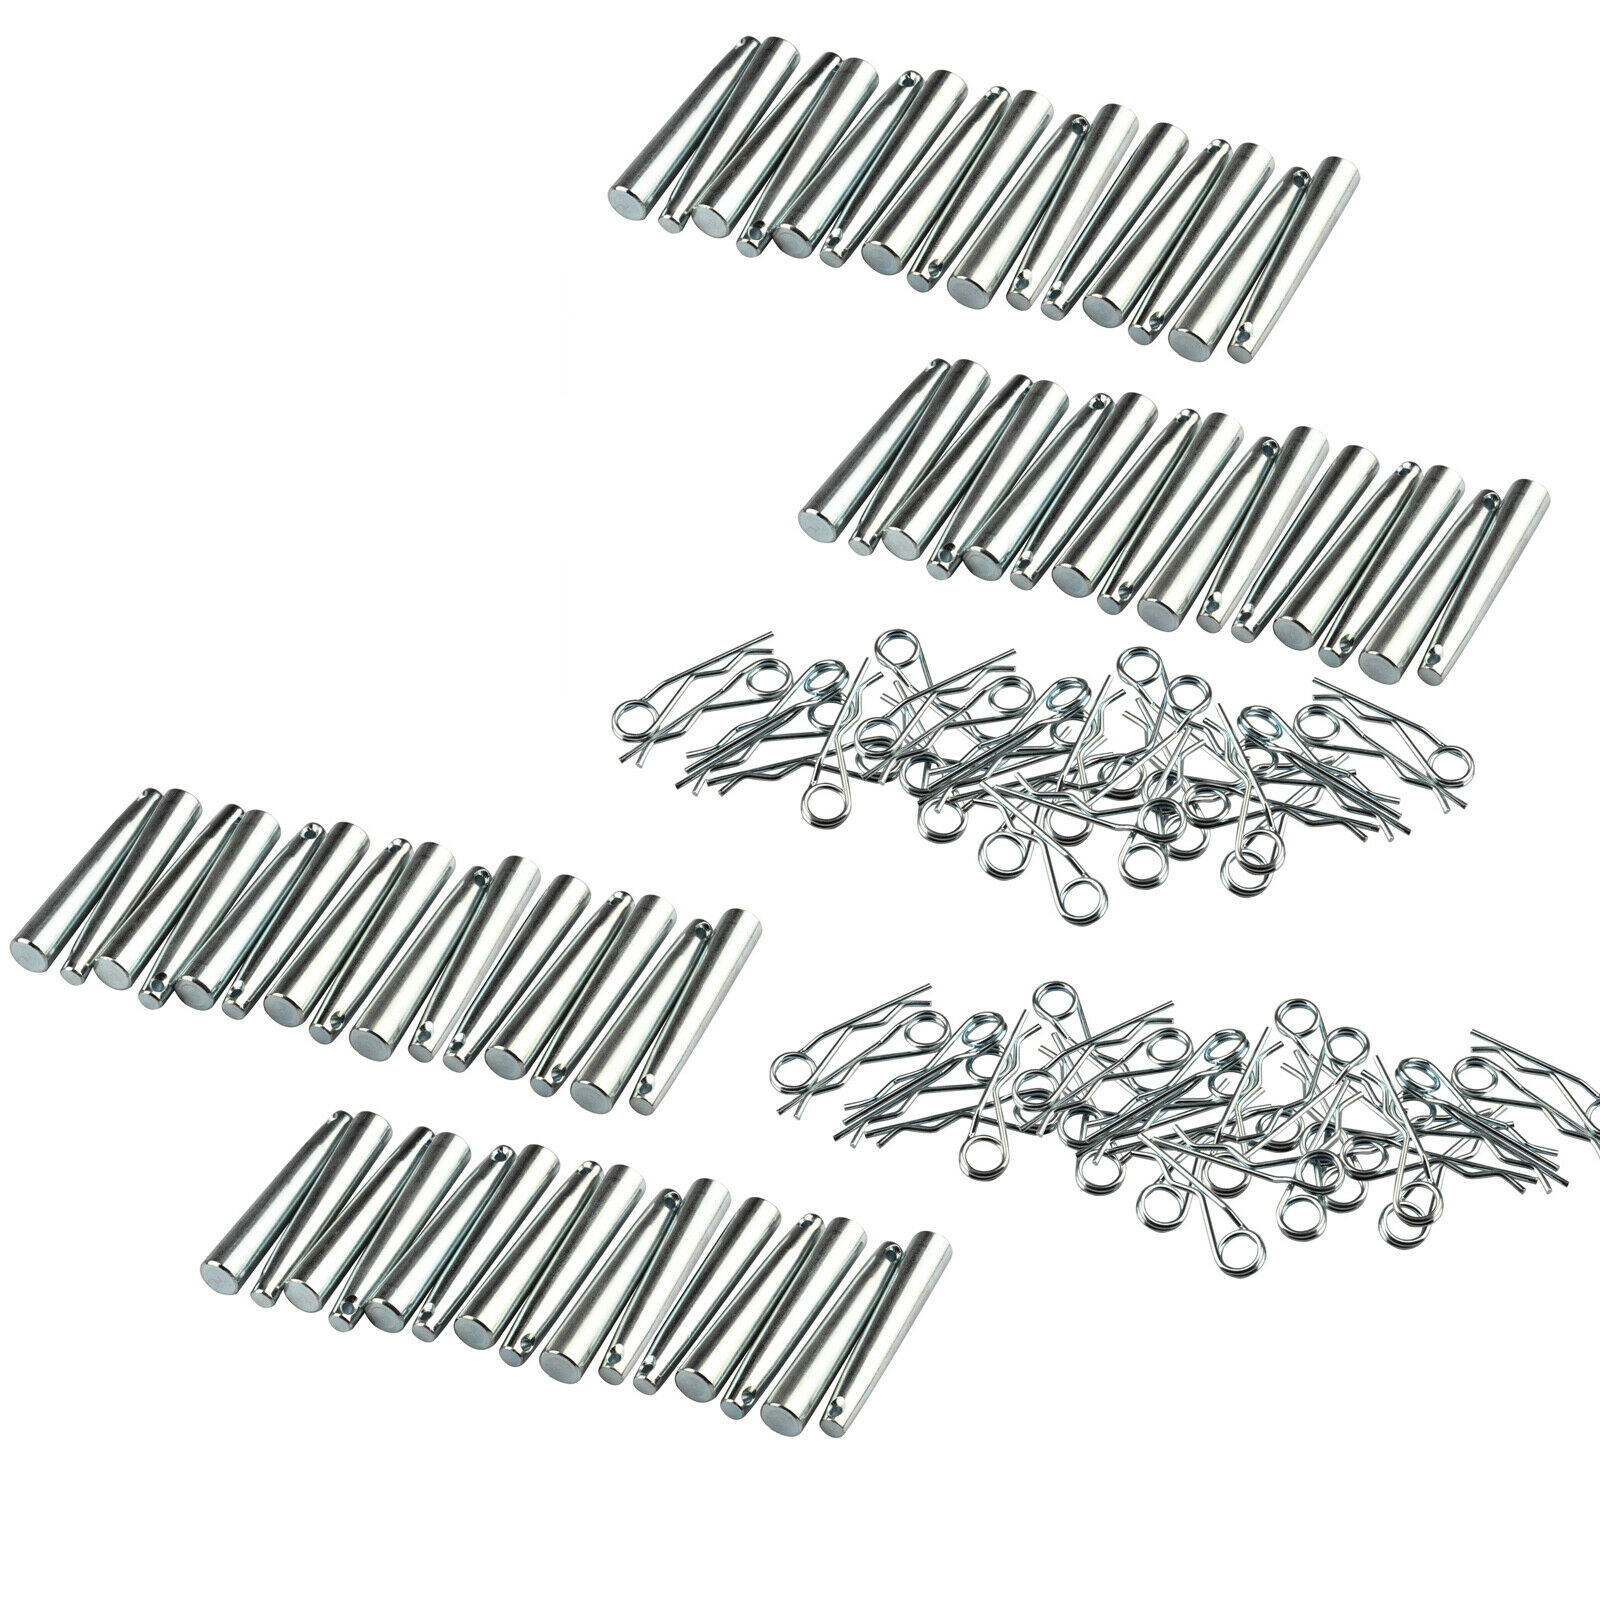 60pcs Aluminum Conical Coupler Pins With R-clip Truss Accessories 2.7 Inch Pin